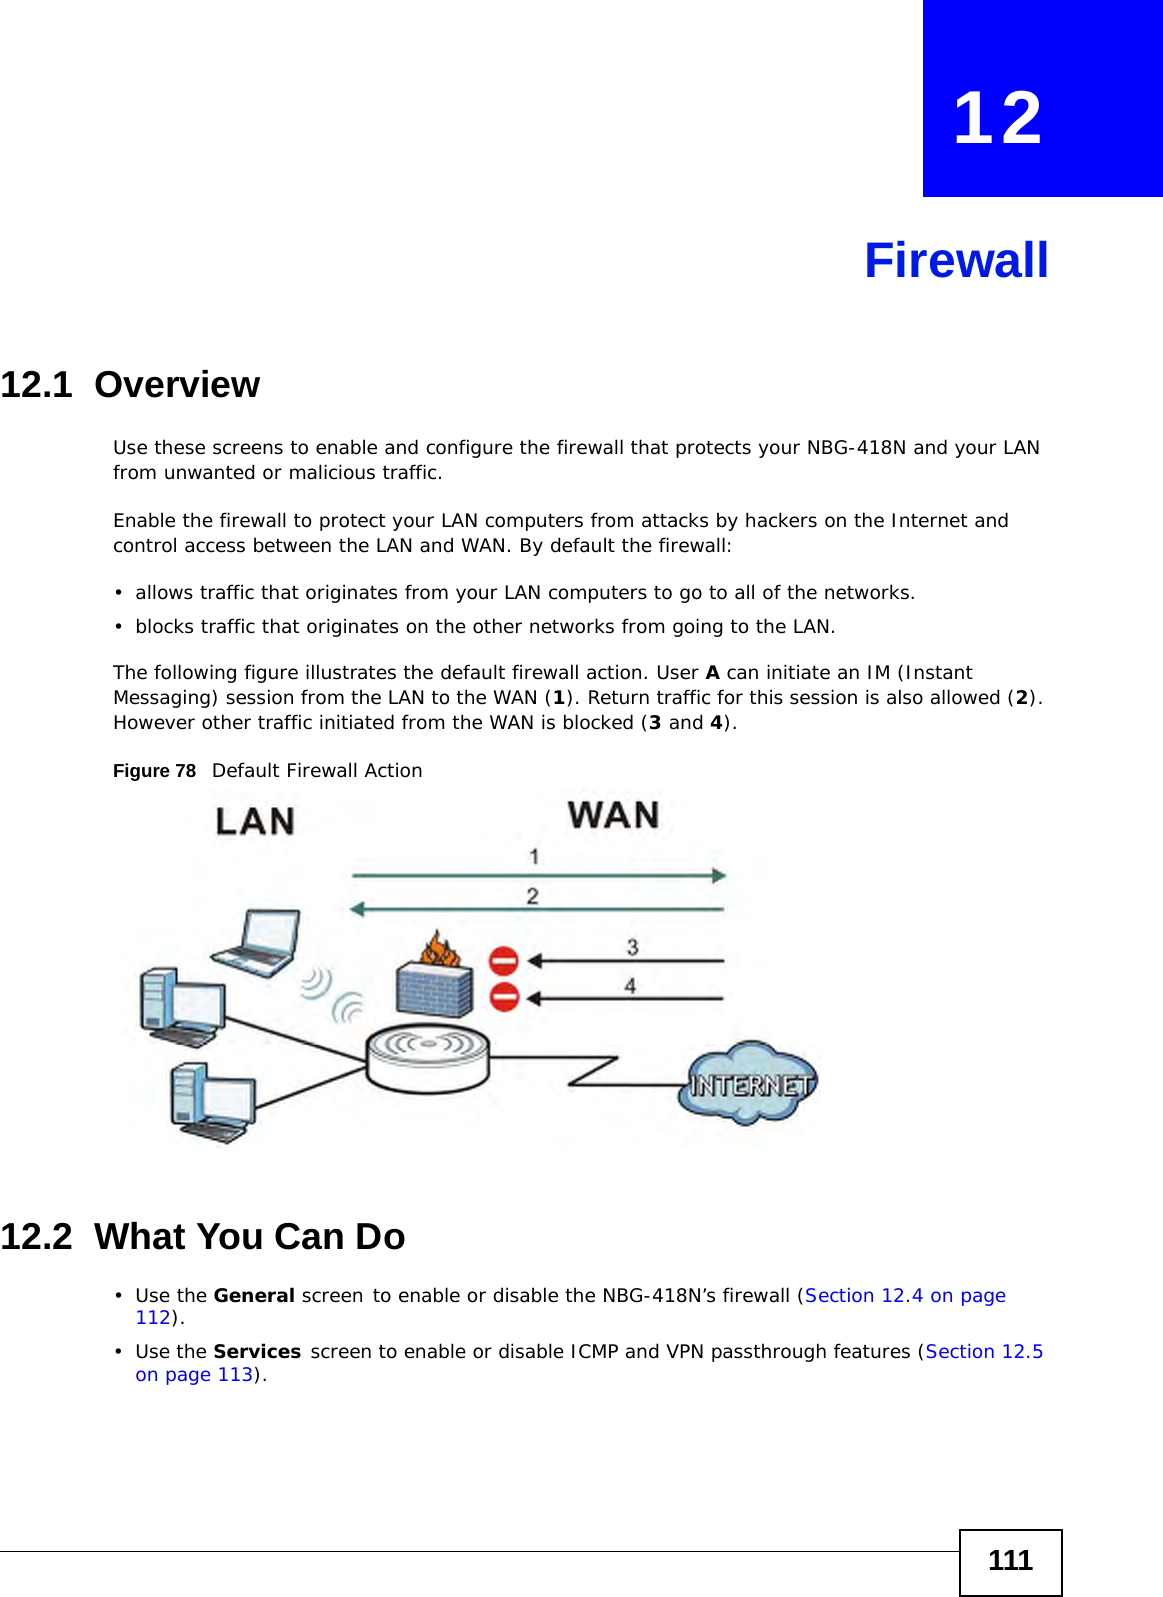 111CHAPTER   12Firewall12.1  Overview   Use these screens to enable and configure the firewall that protects your NBG-418N and your LAN from unwanted or malicious traffic.Enable the firewall to protect your LAN computers from attacks by hackers on the Internet and control access between the LAN and WAN. By default the firewall:• allows traffic that originates from your LAN computers to go to all of the networks. • blocks traffic that originates on the other networks from going to the LAN. The following figure illustrates the default firewall action. User A can initiate an IM (Instant Messaging) session from the LAN to the WAN (1). Return traffic for this session is also allowed (2). However other traffic initiated from the WAN is blocked (3 and 4).Figure 78   Default Firewall Action12.2  What You Can Do•Use the General screen to enable or disable the NBG-418N’s firewall (Section 12.4 on page 112).•Use the Services screen to enable or disable ICMP and VPN passthrough features (Section 12.5 on page 113).